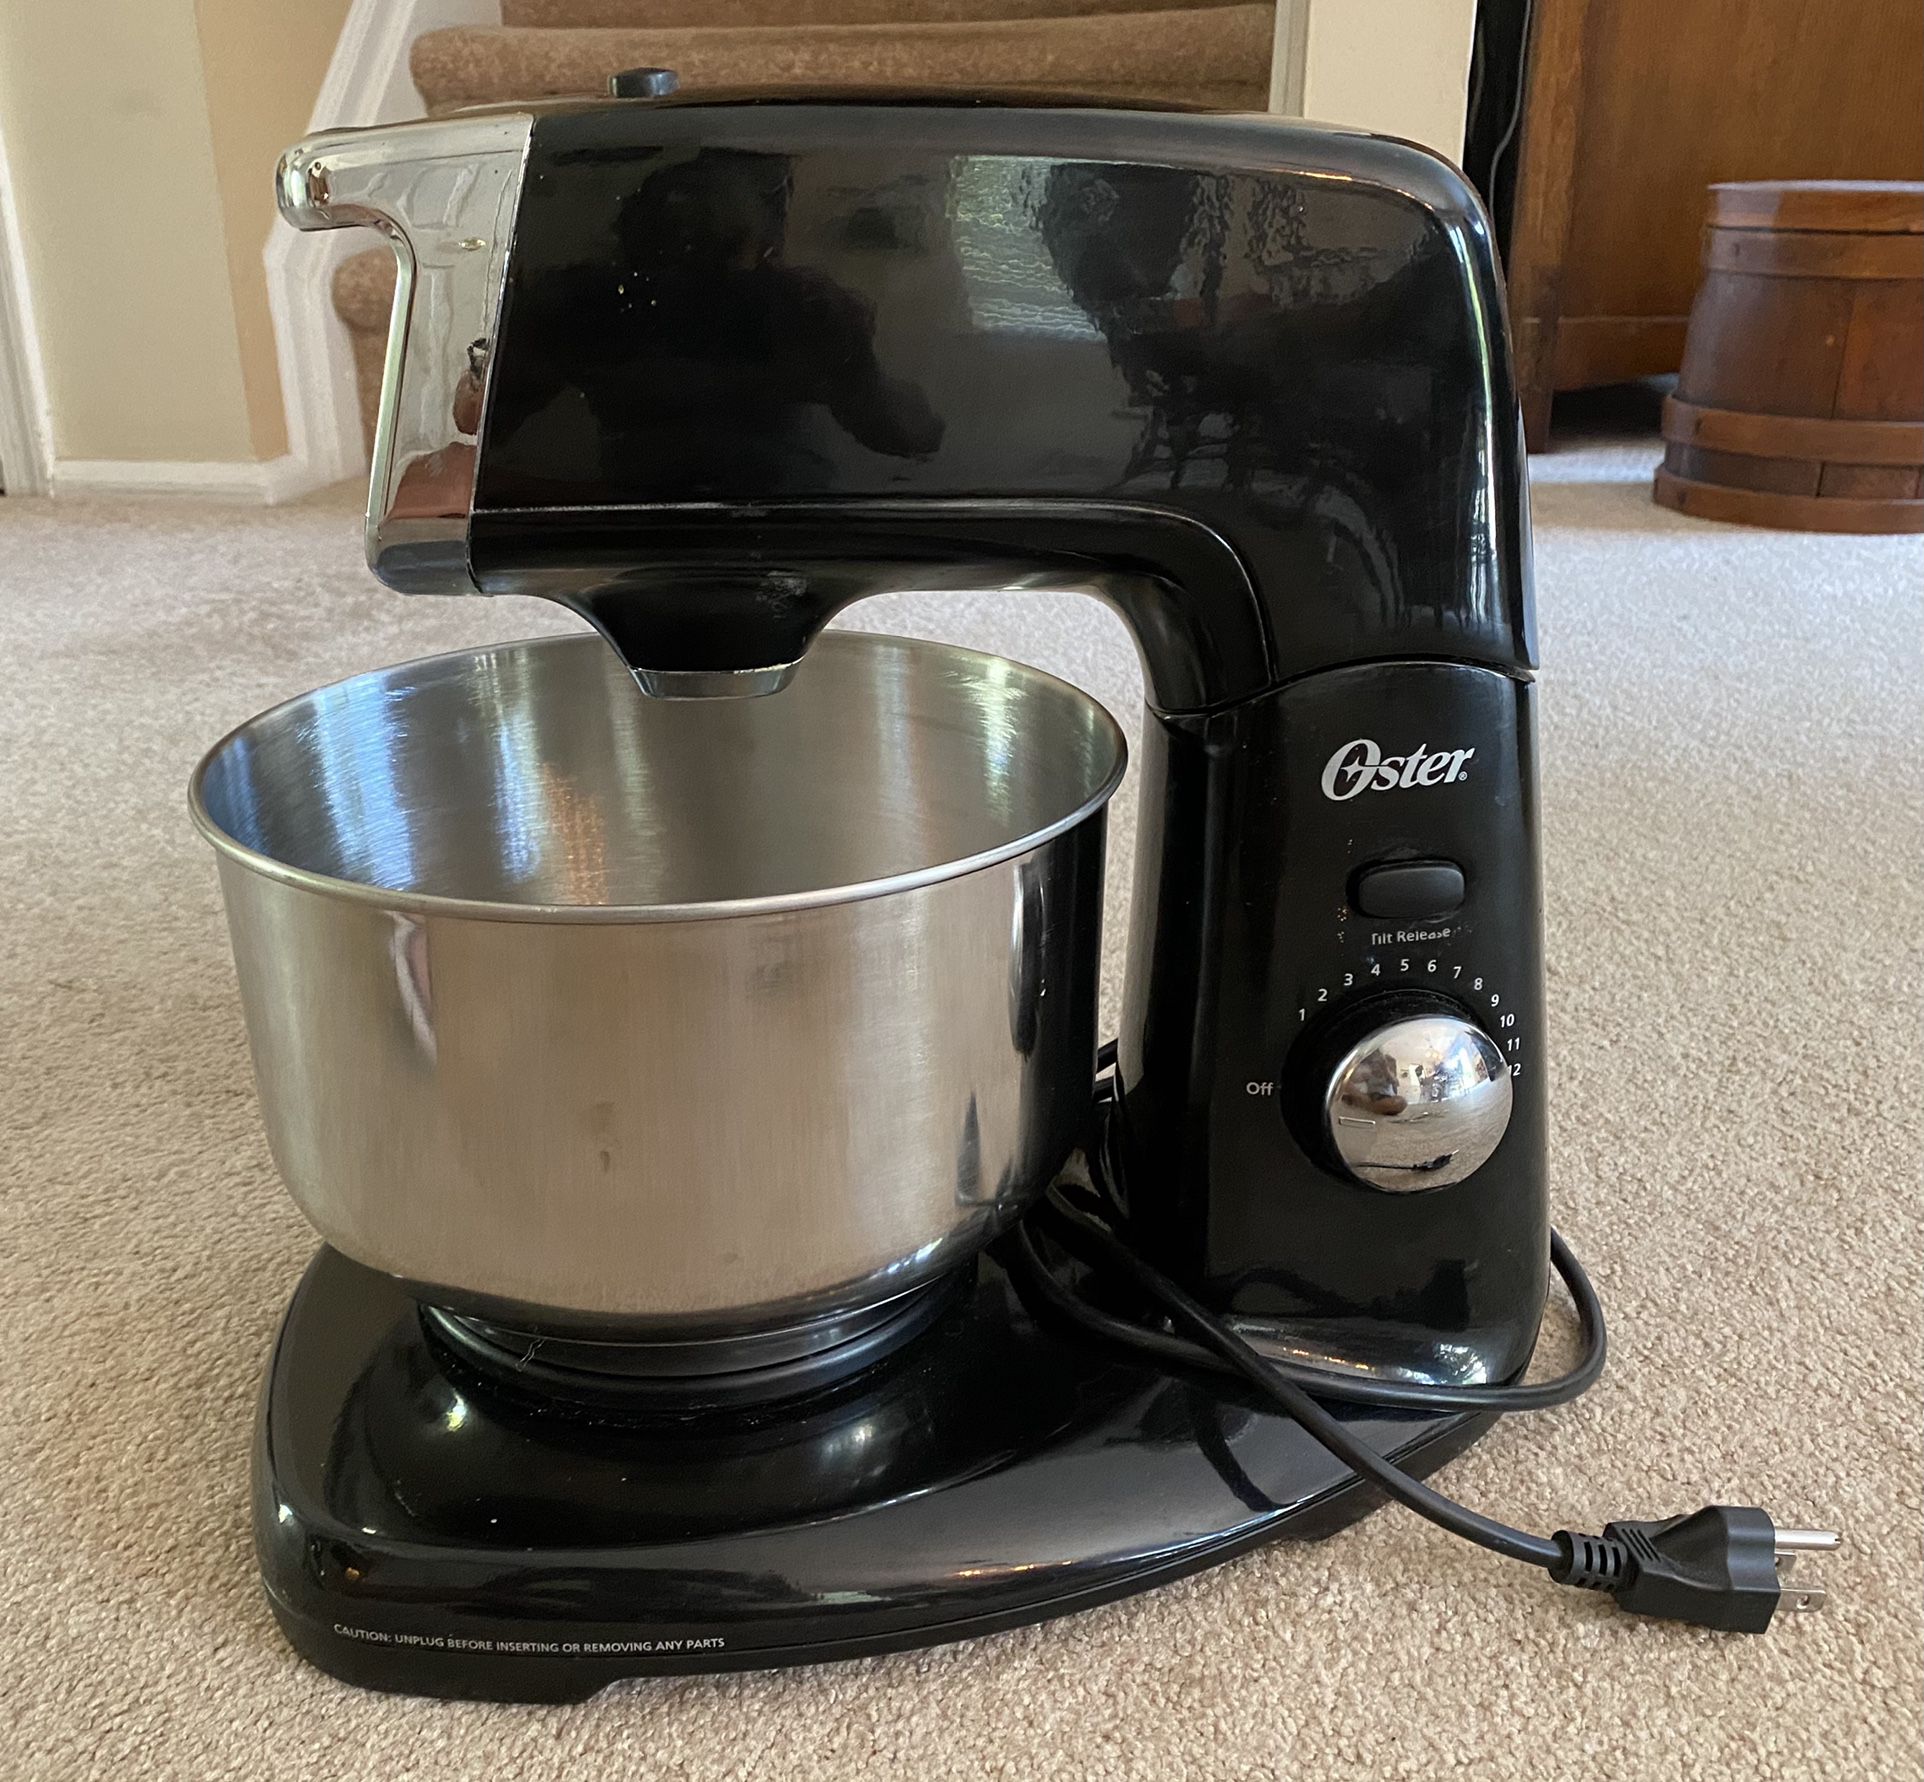 Robo Twist Electric Jar Opener for Sale in Brewster, NY - OfferUp